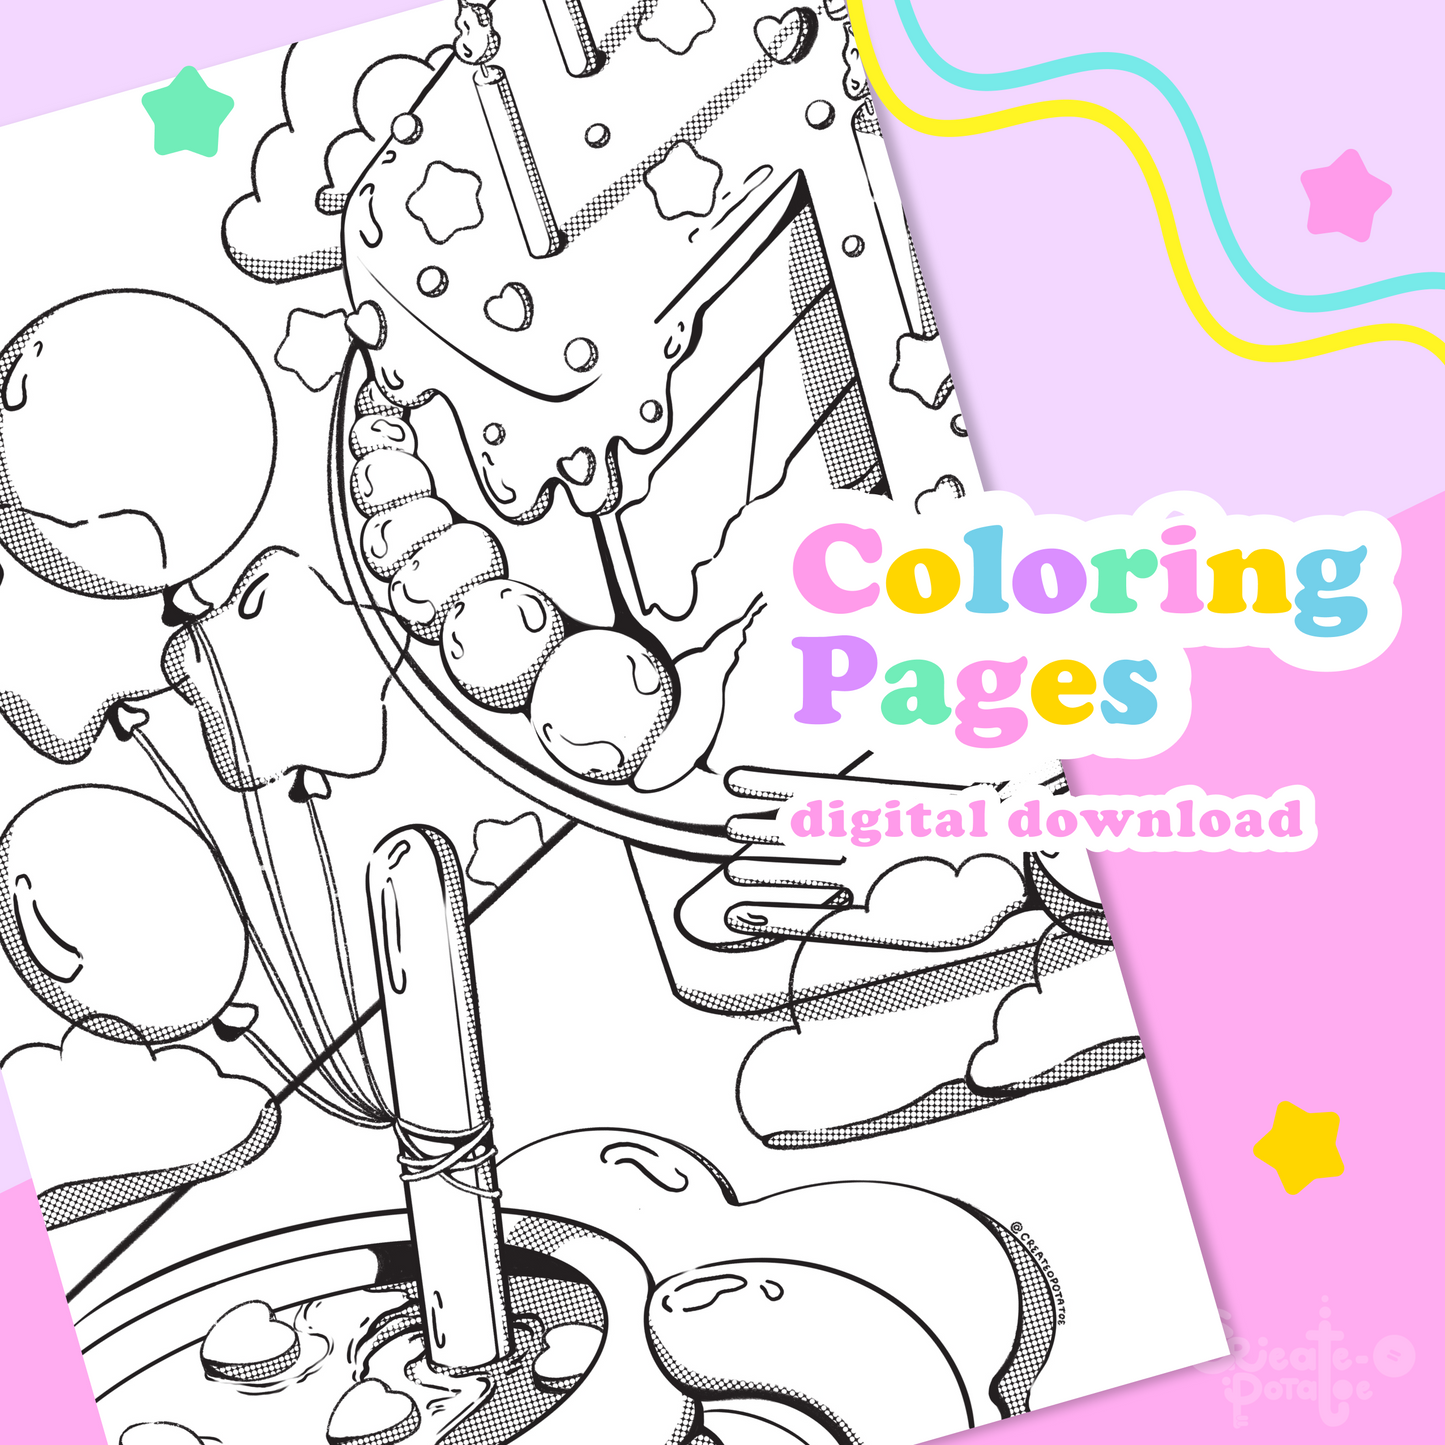 HAPPY BIRTHDAY | coloring pages, digital download